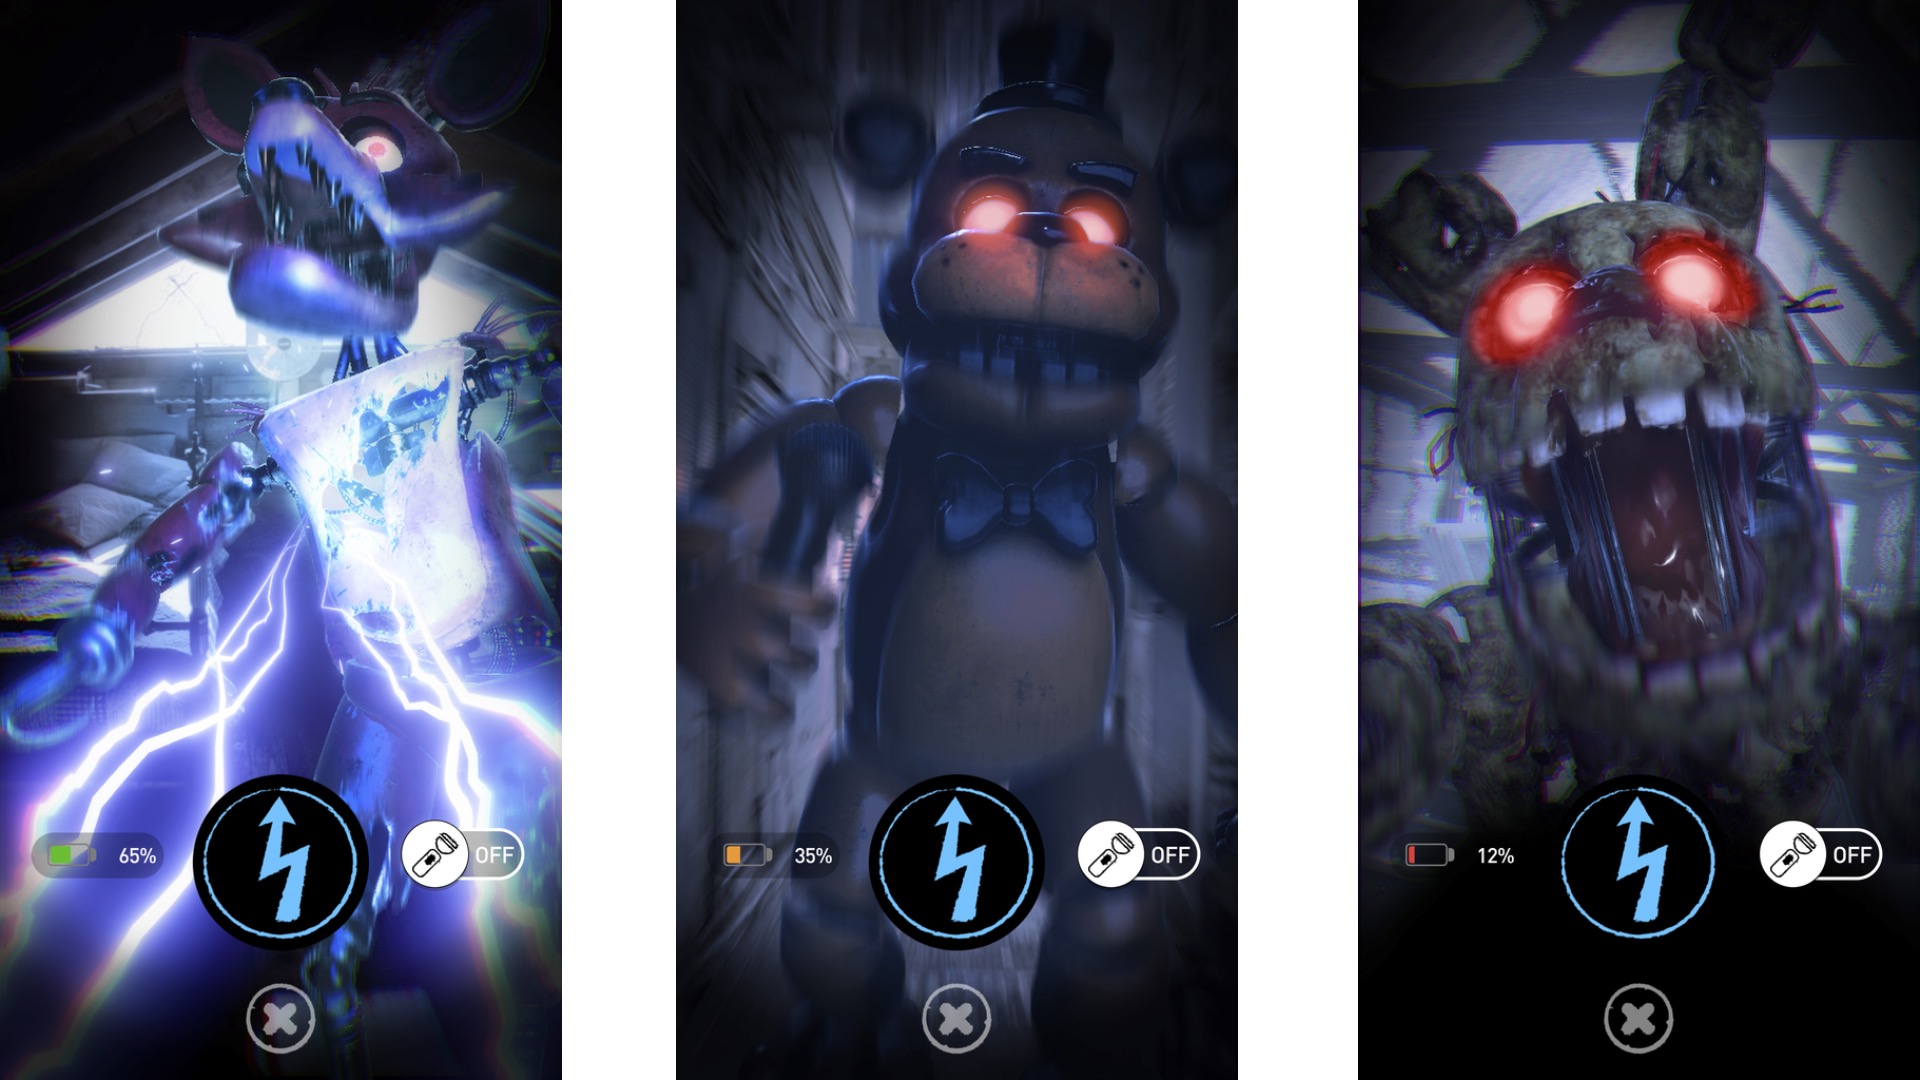 Five Nights at Freddy's AR: Special Delivery Brings Horror to the Real World